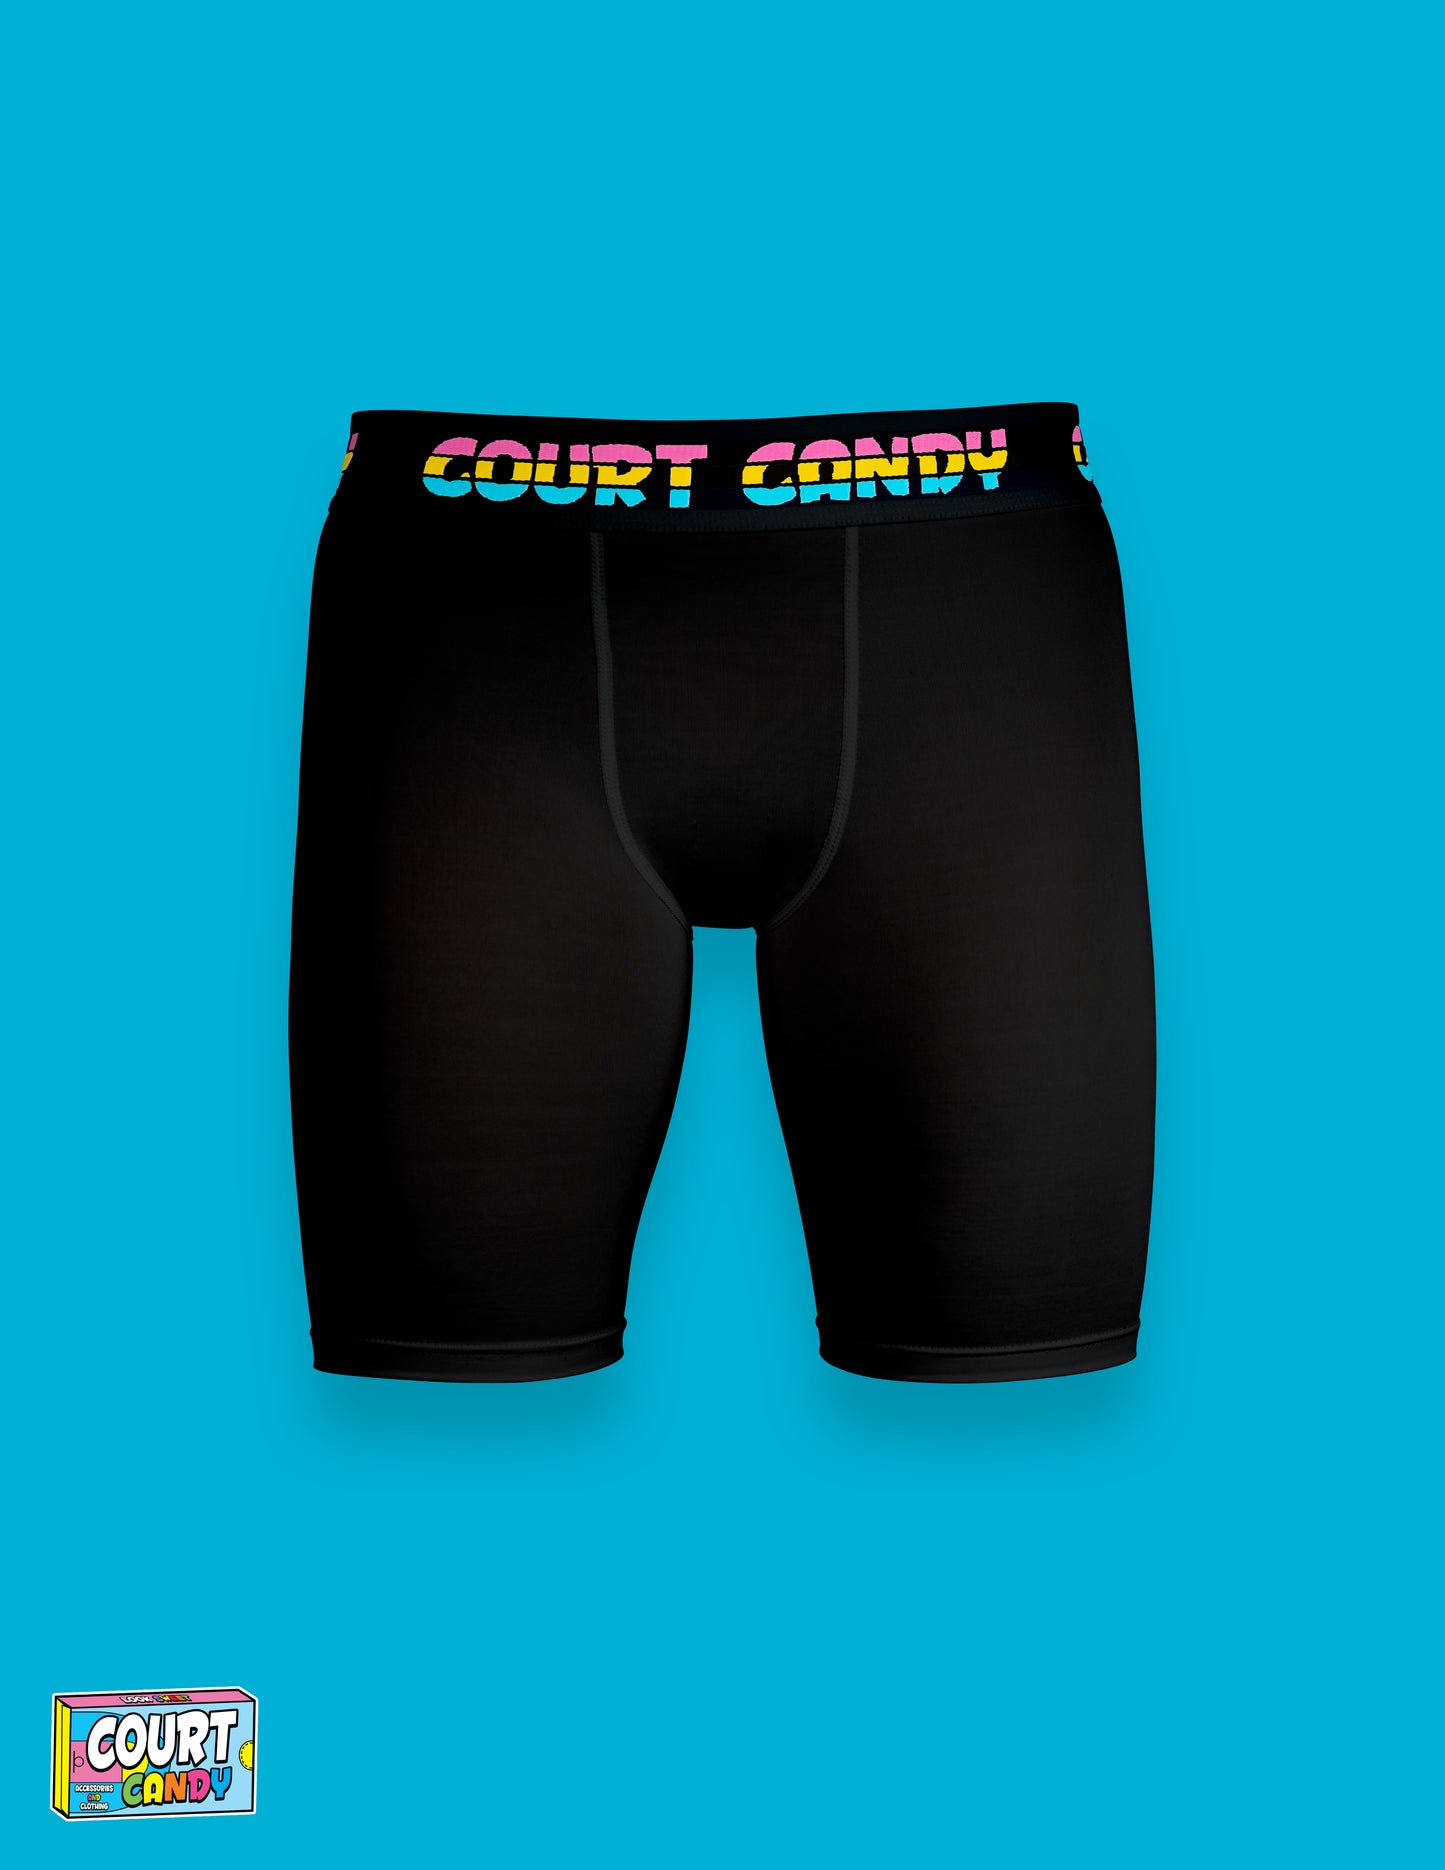 Court Candy Mens Black Compression Shorts 3/4 length basketball compression shorts athletic compression shorts for sports underwear for bball hoops NBA